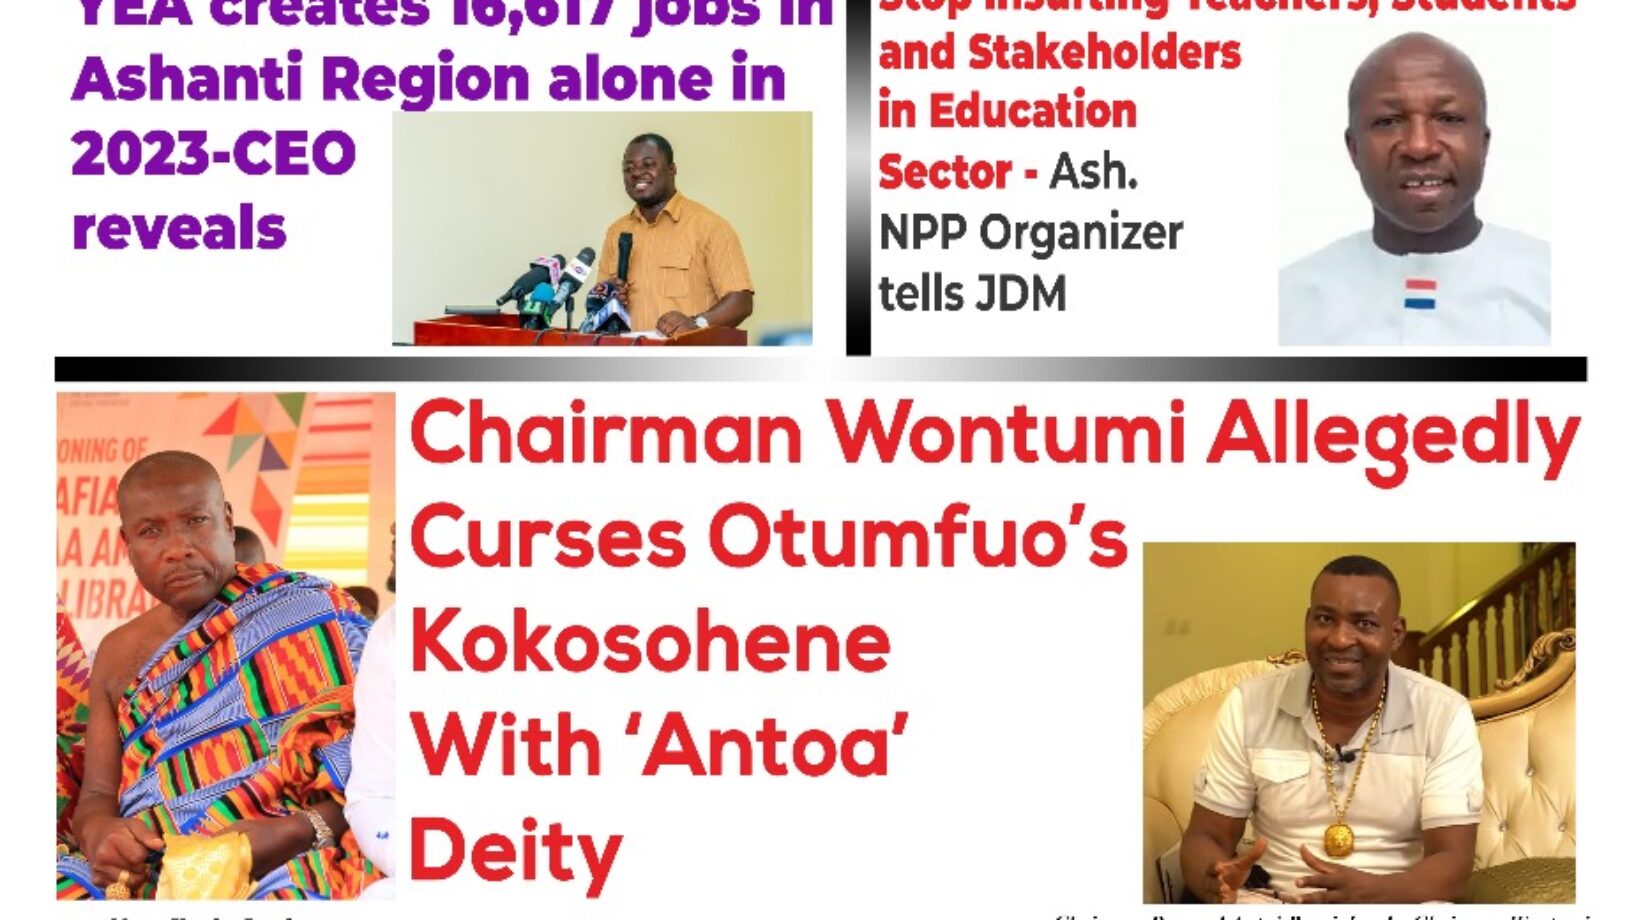 Thursday,11th January,2024 Edition of The New Trust Newspaper